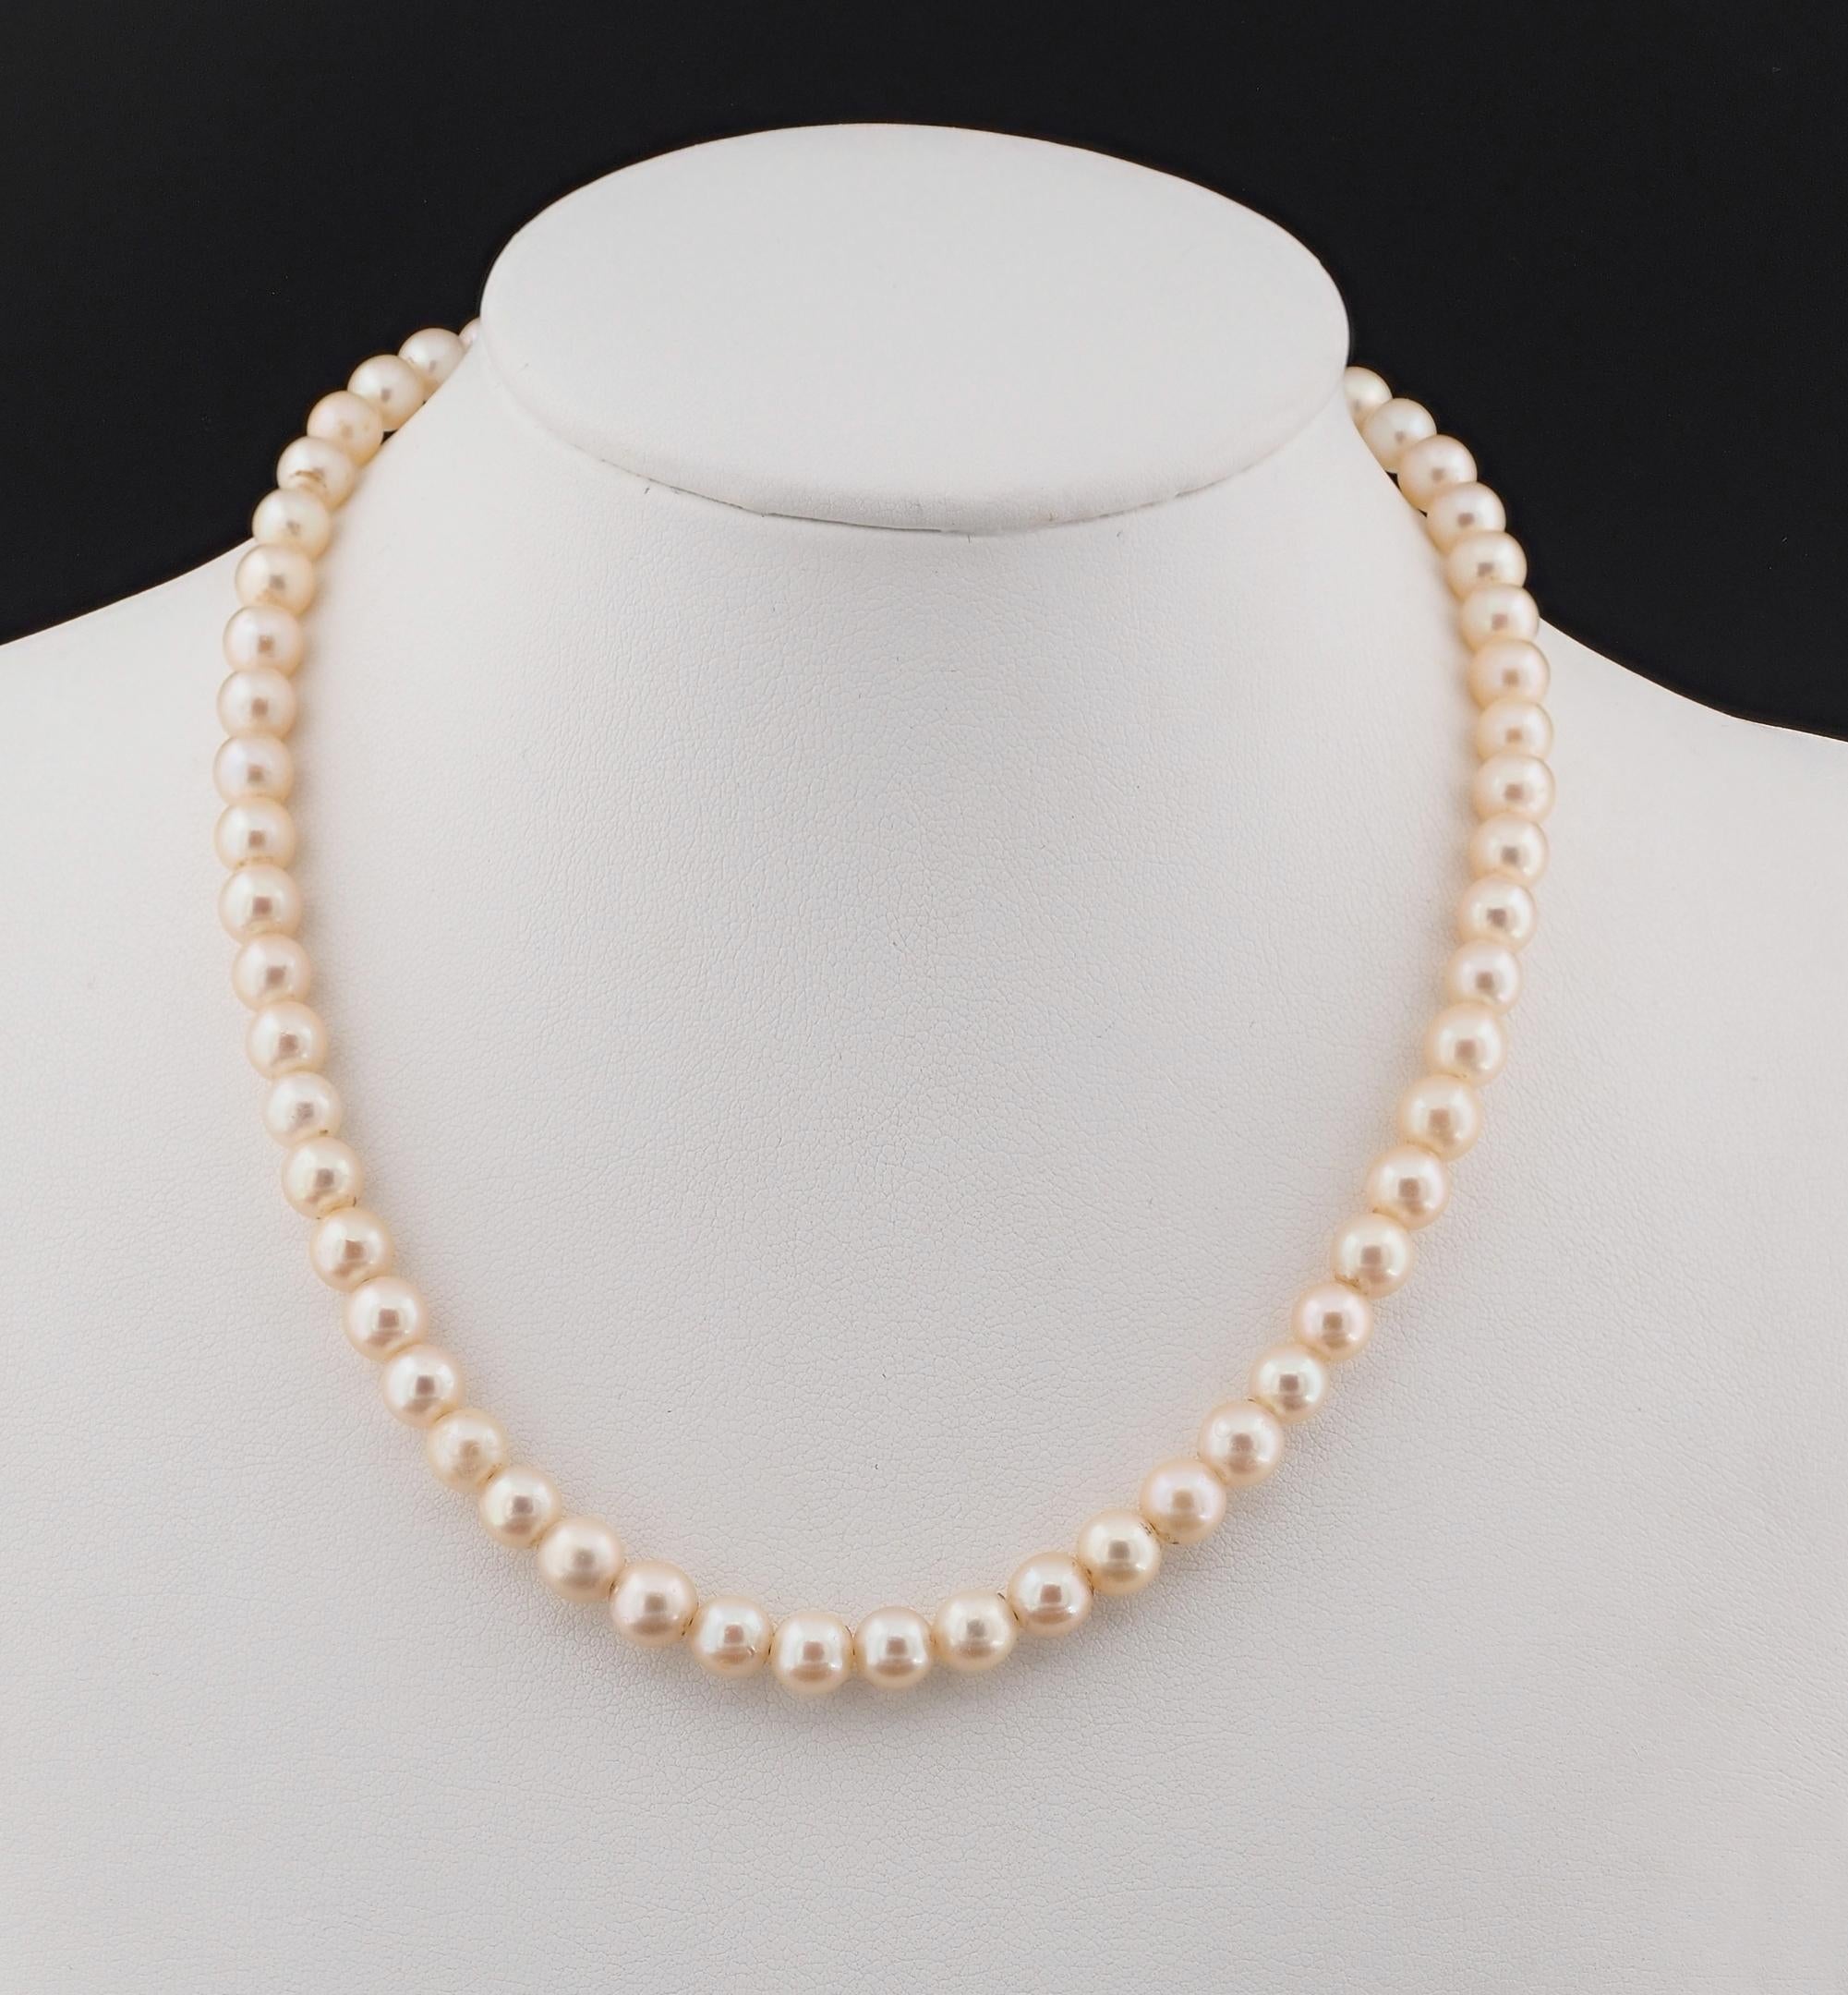 A Touch of Elegance
This superb antique Art Deco period single Pearl strand is of endless beauty
Epitome of elegance, these antiques necklaces are simply so much desirable and hard to come across
1920 ca; comprising one single strand of round ( 6